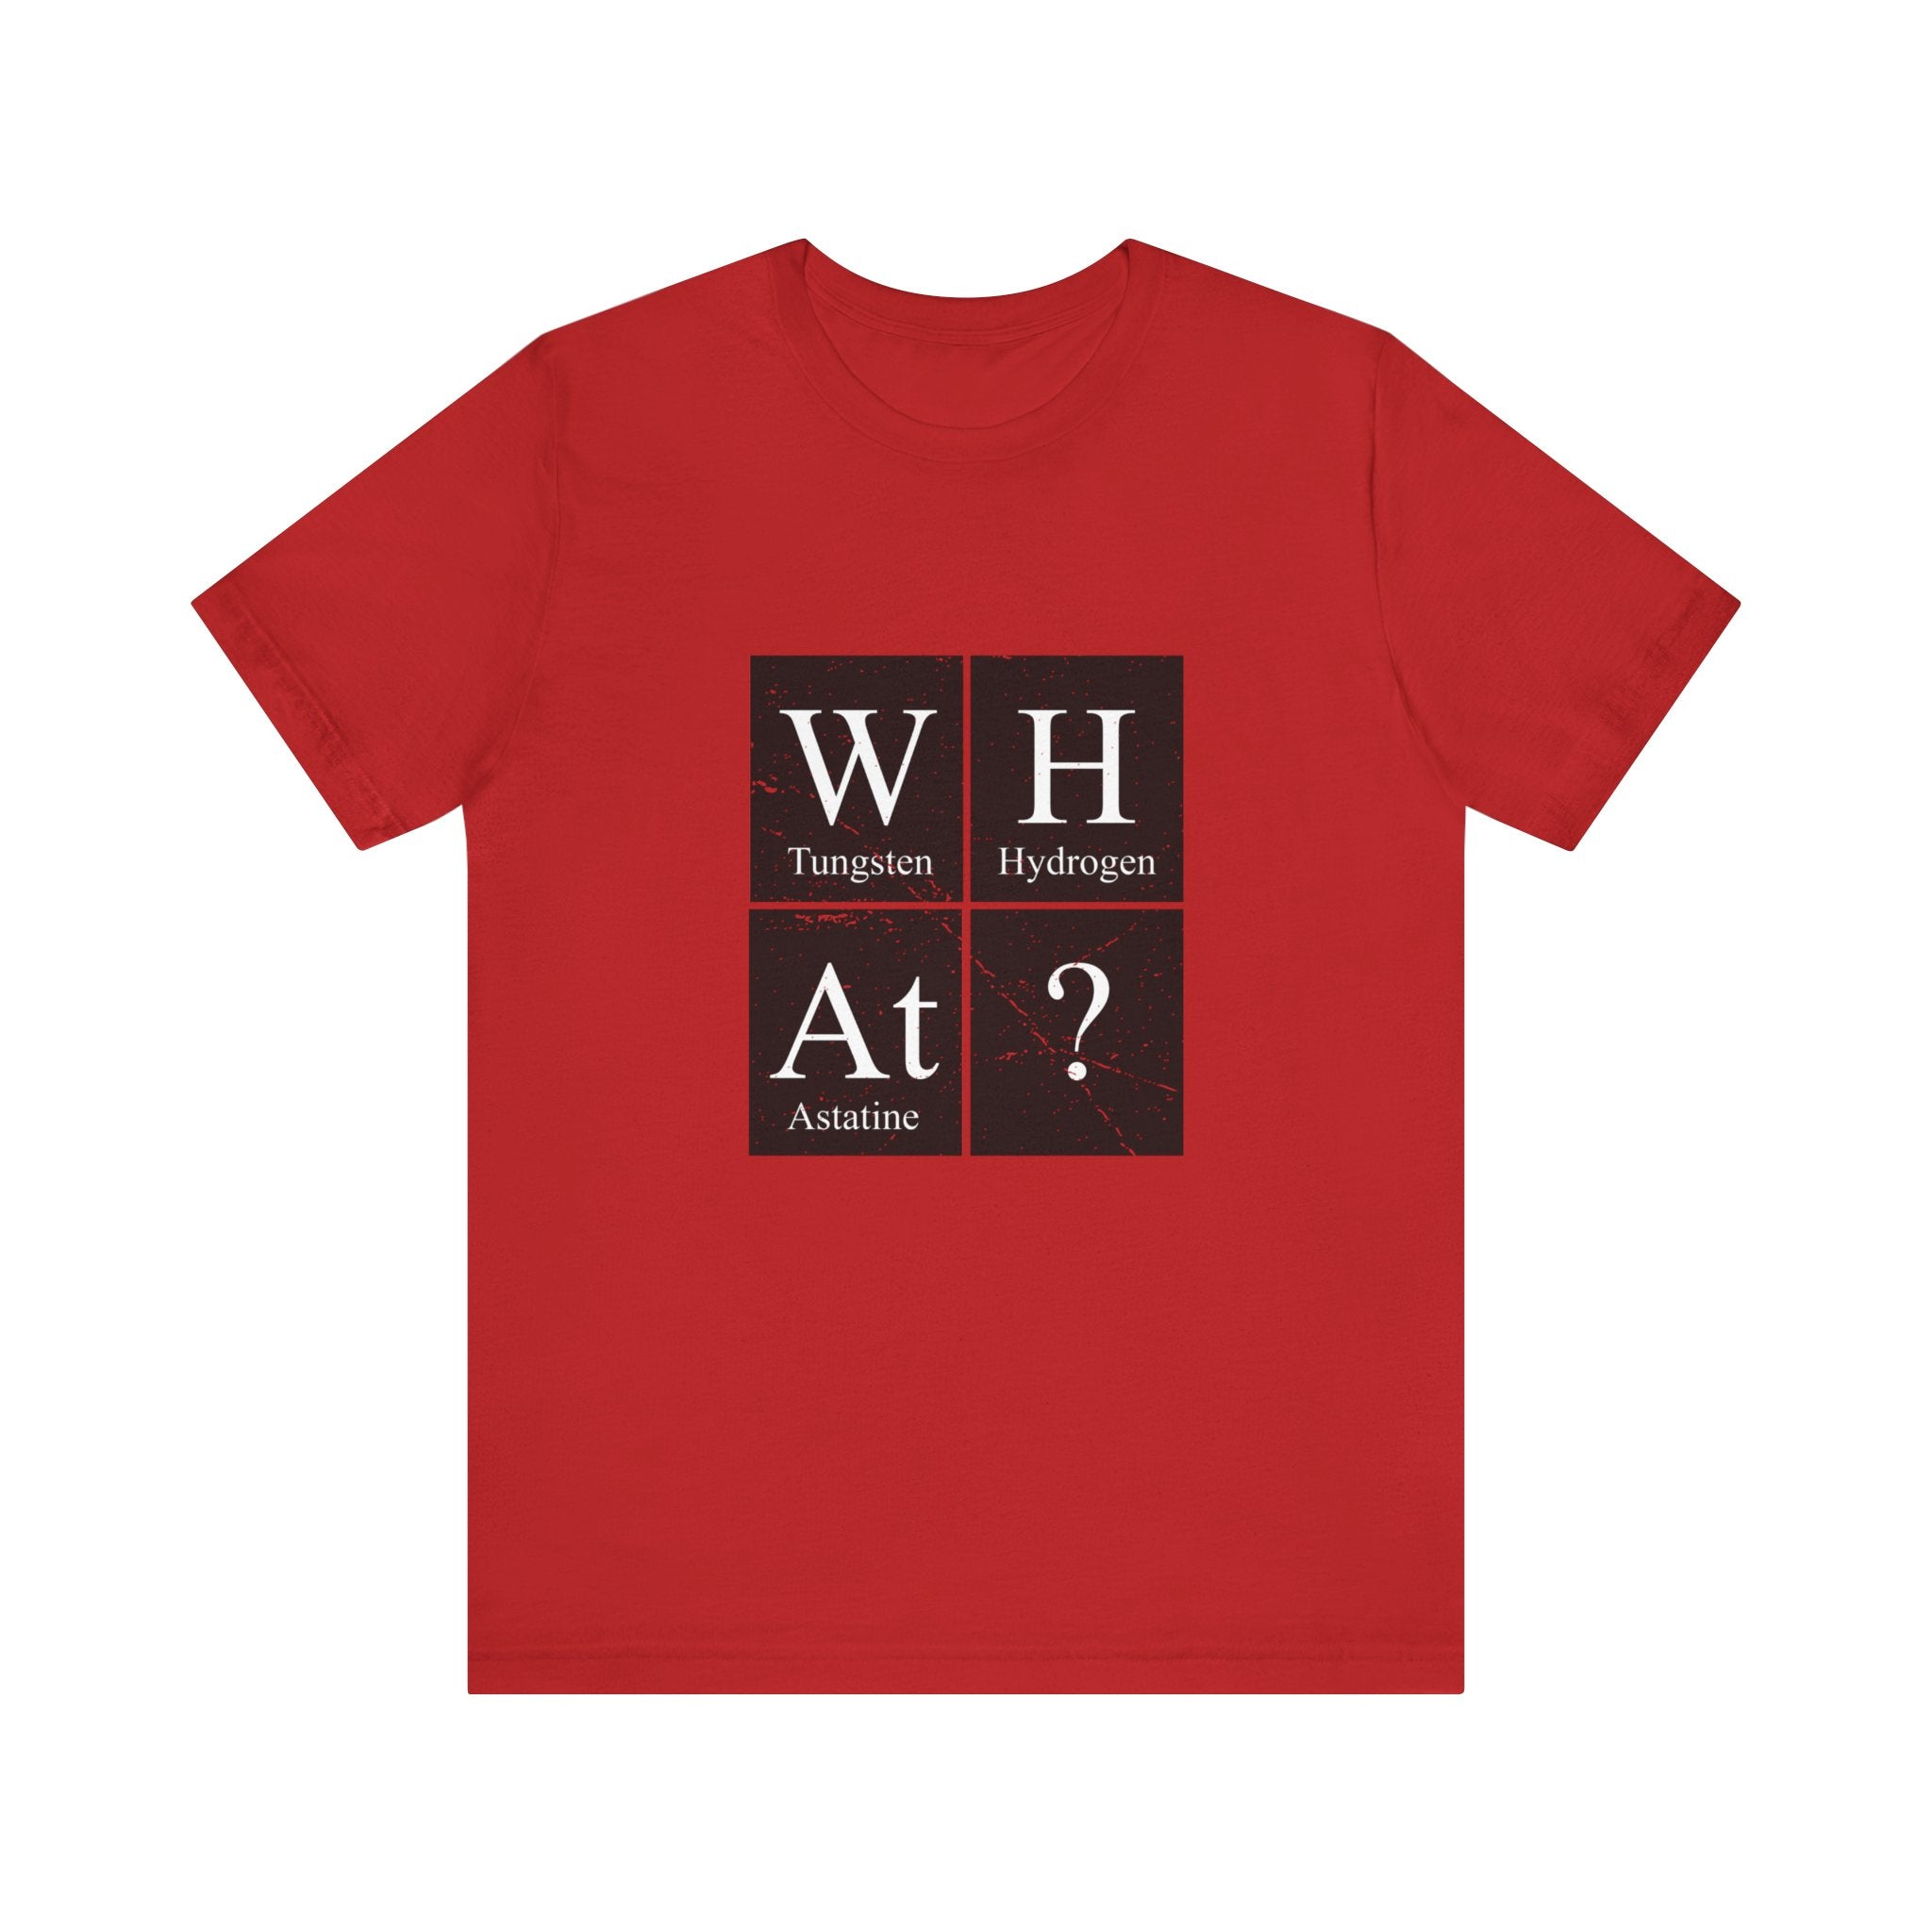 Red unisex jersey tee with a design featuring the periodic table elements for tungsten, hydrogen, and astatine arranged to spell "W-H-At-?" with a question mark.